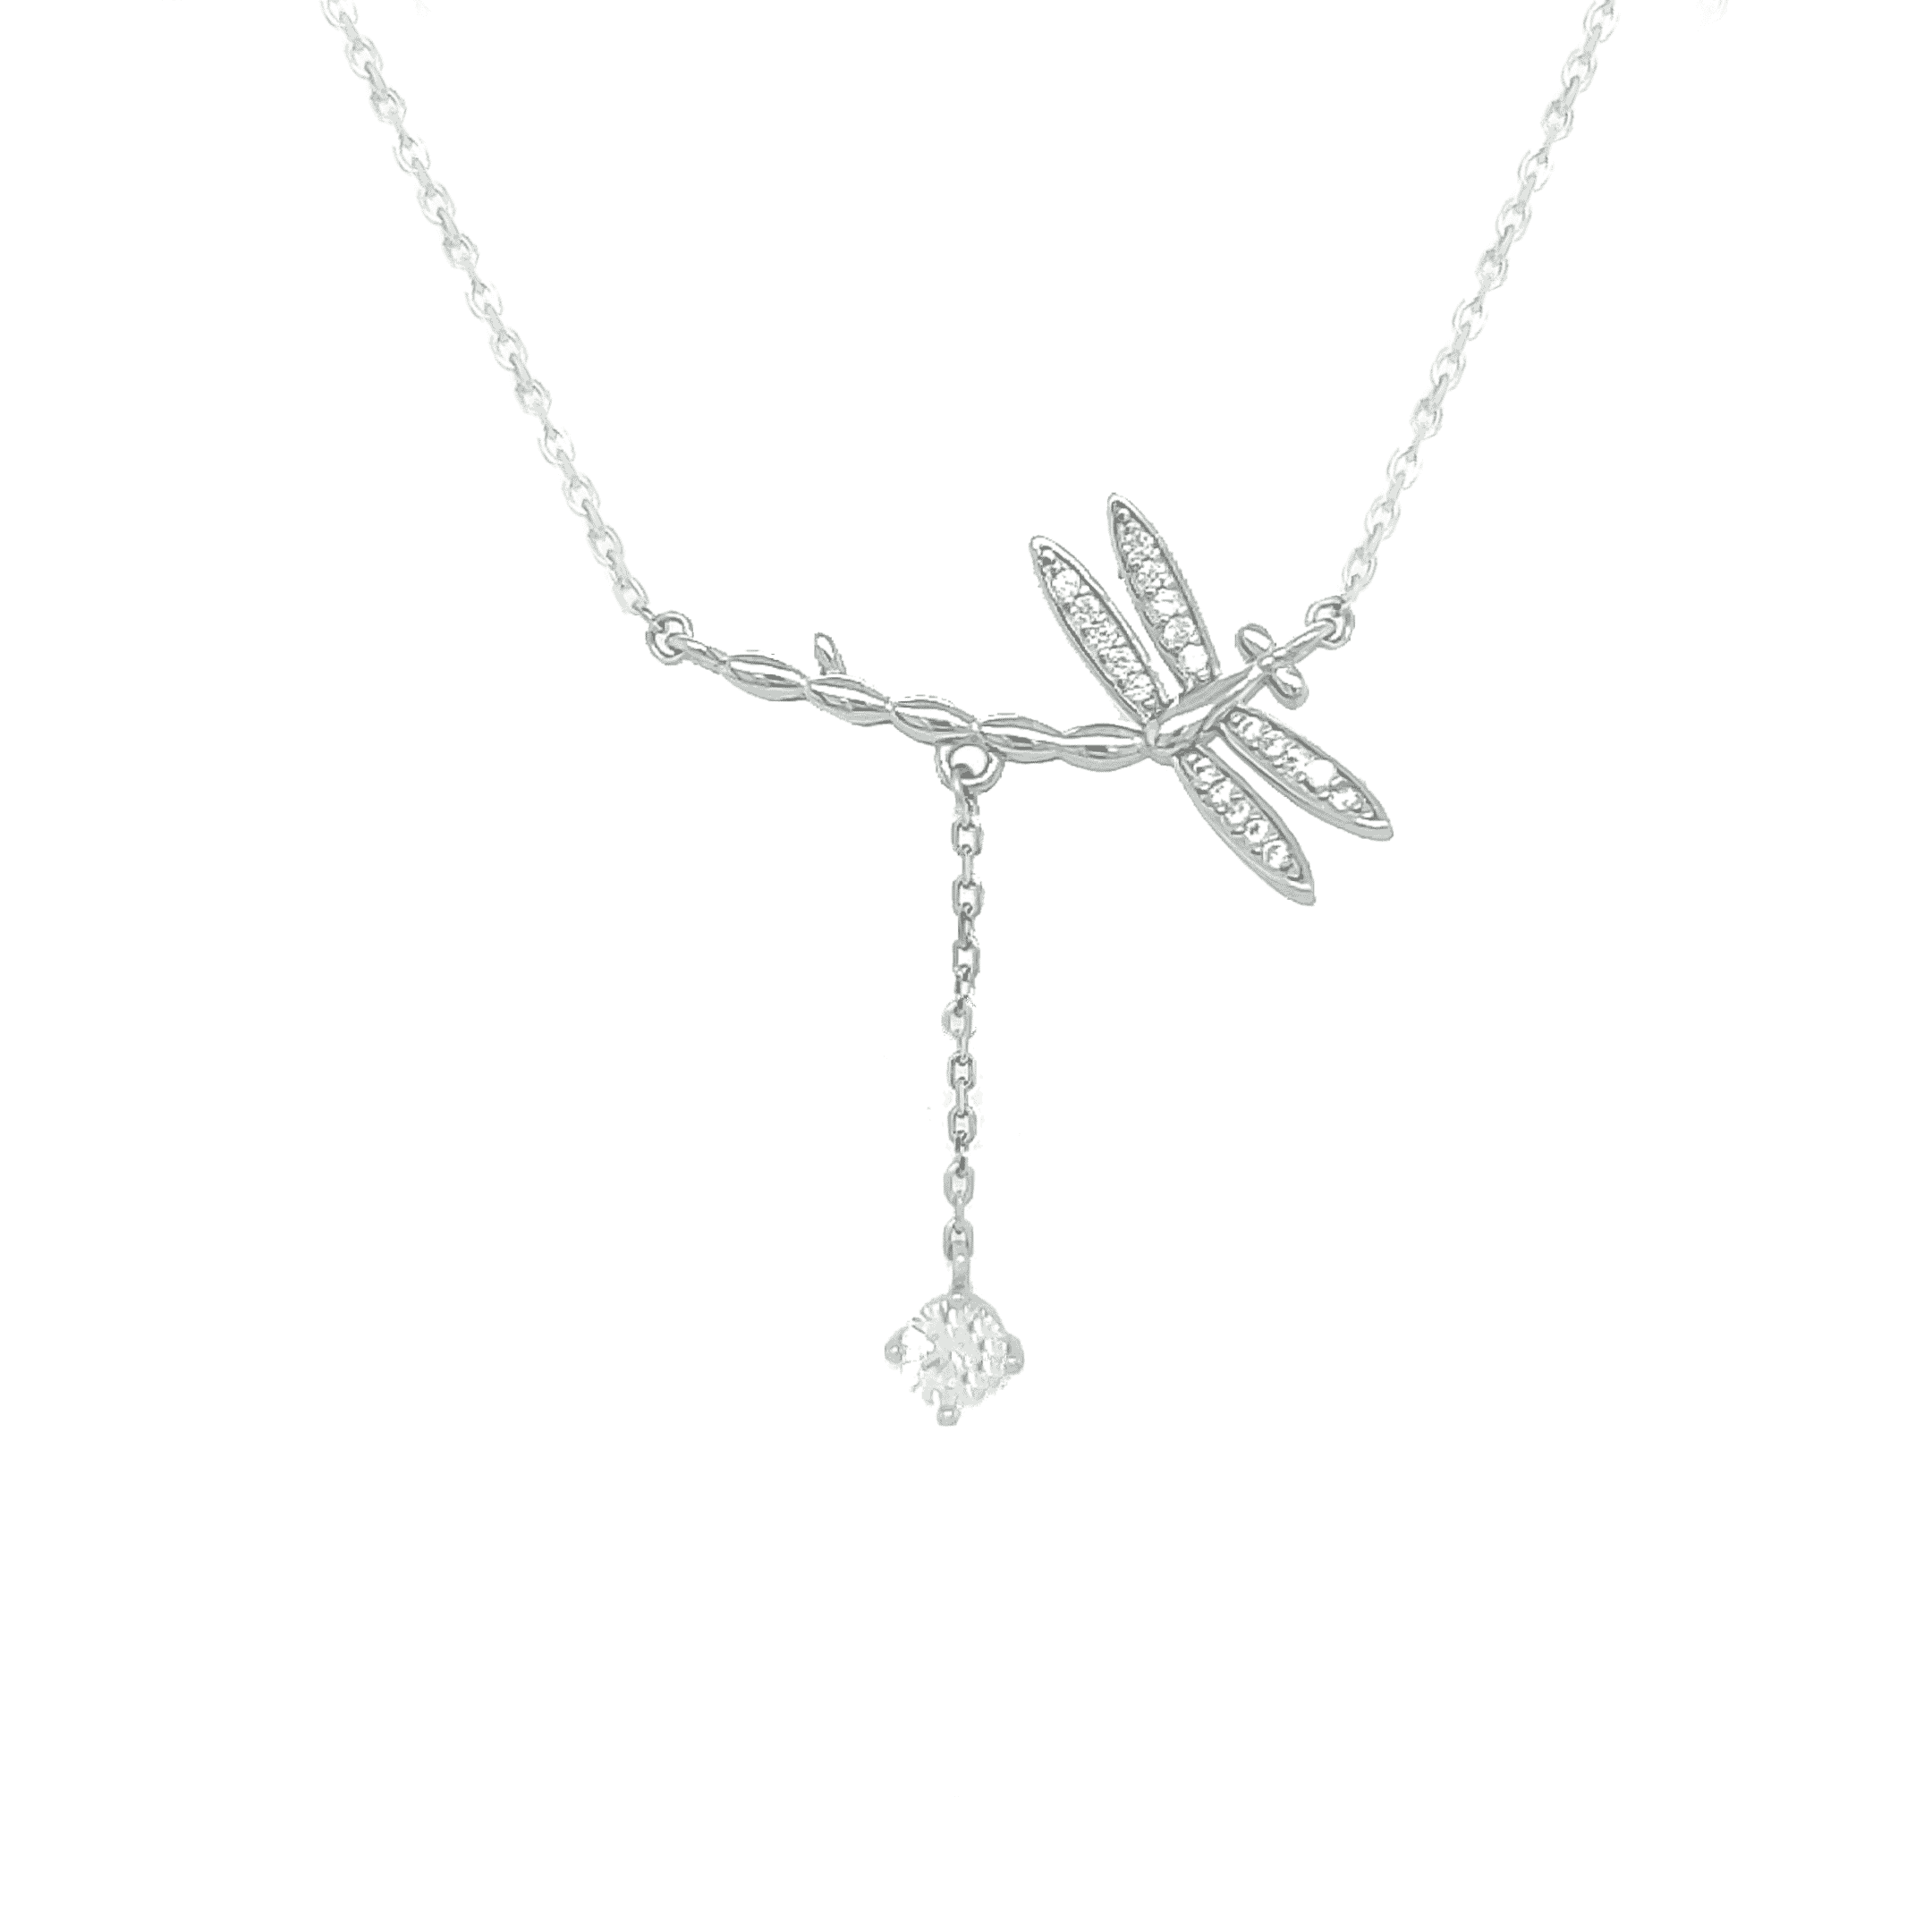 Asfour 925 Sterling Silver Necklace - NR0159